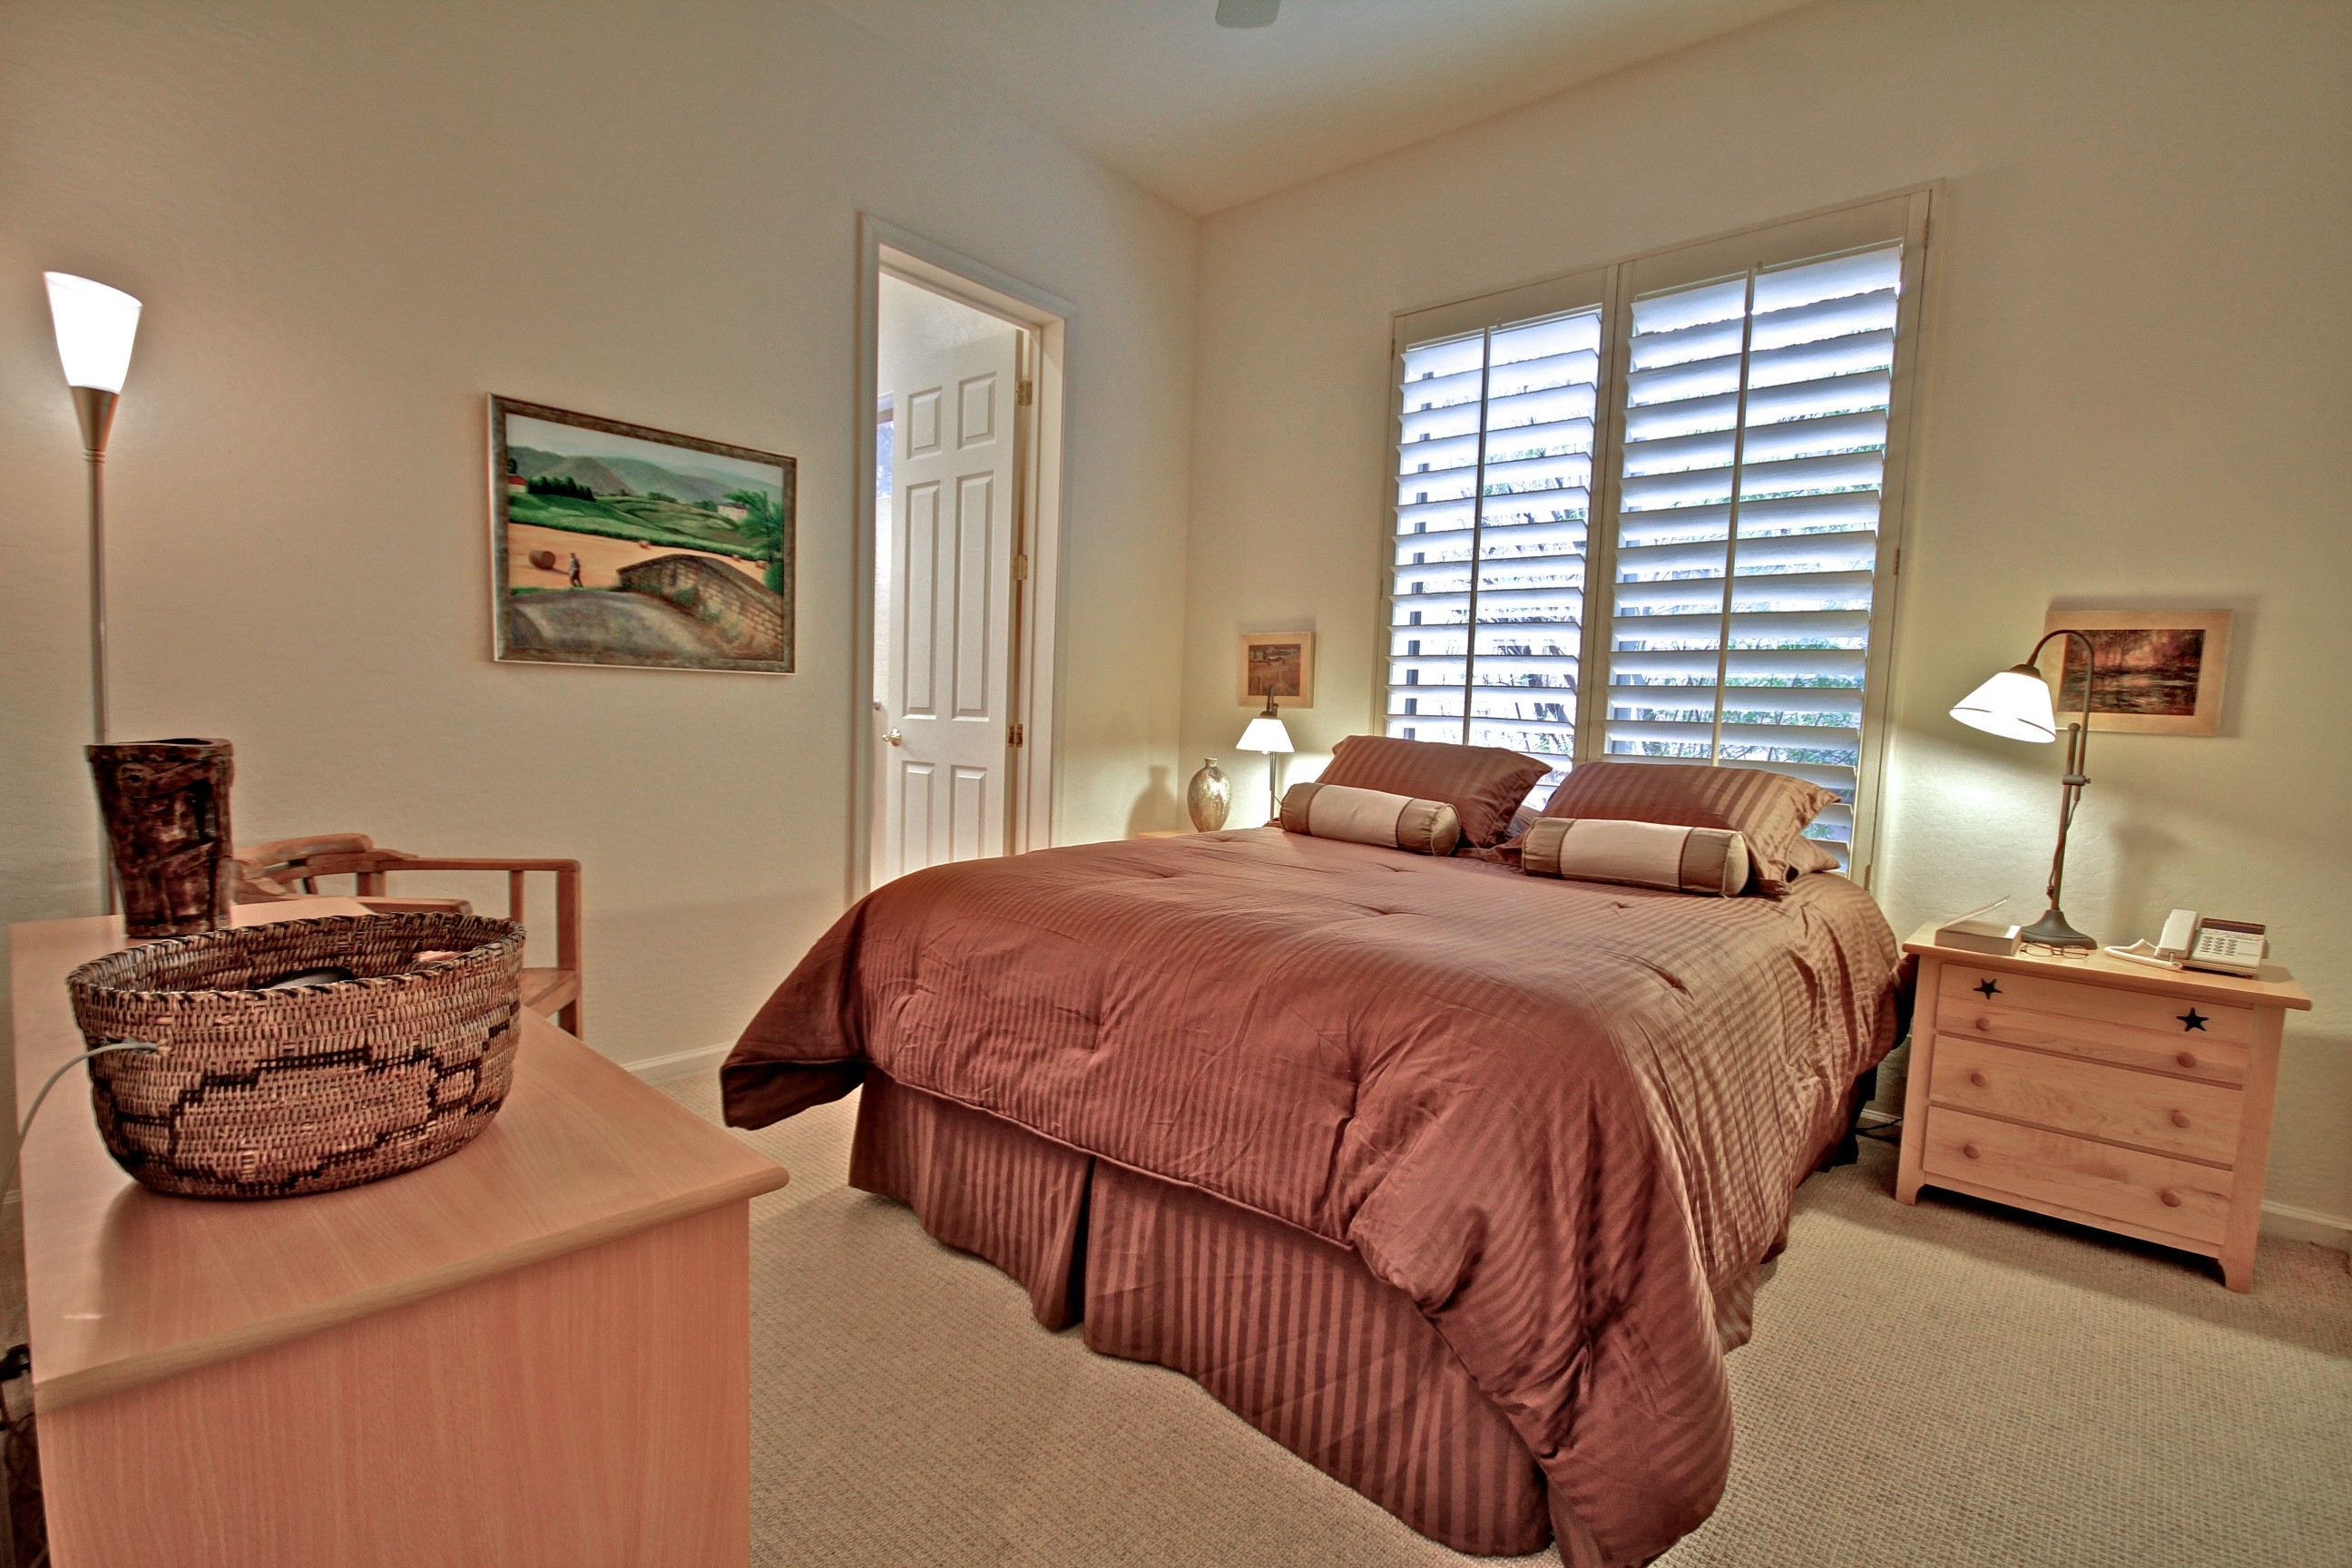 Guest bedroom with ensuite bath at this Scottsdale home for sale in DC Ranch located at 20534 N 95th St Scottsdale, AZ 85255 listed by Don Matheson at The Matheson Team